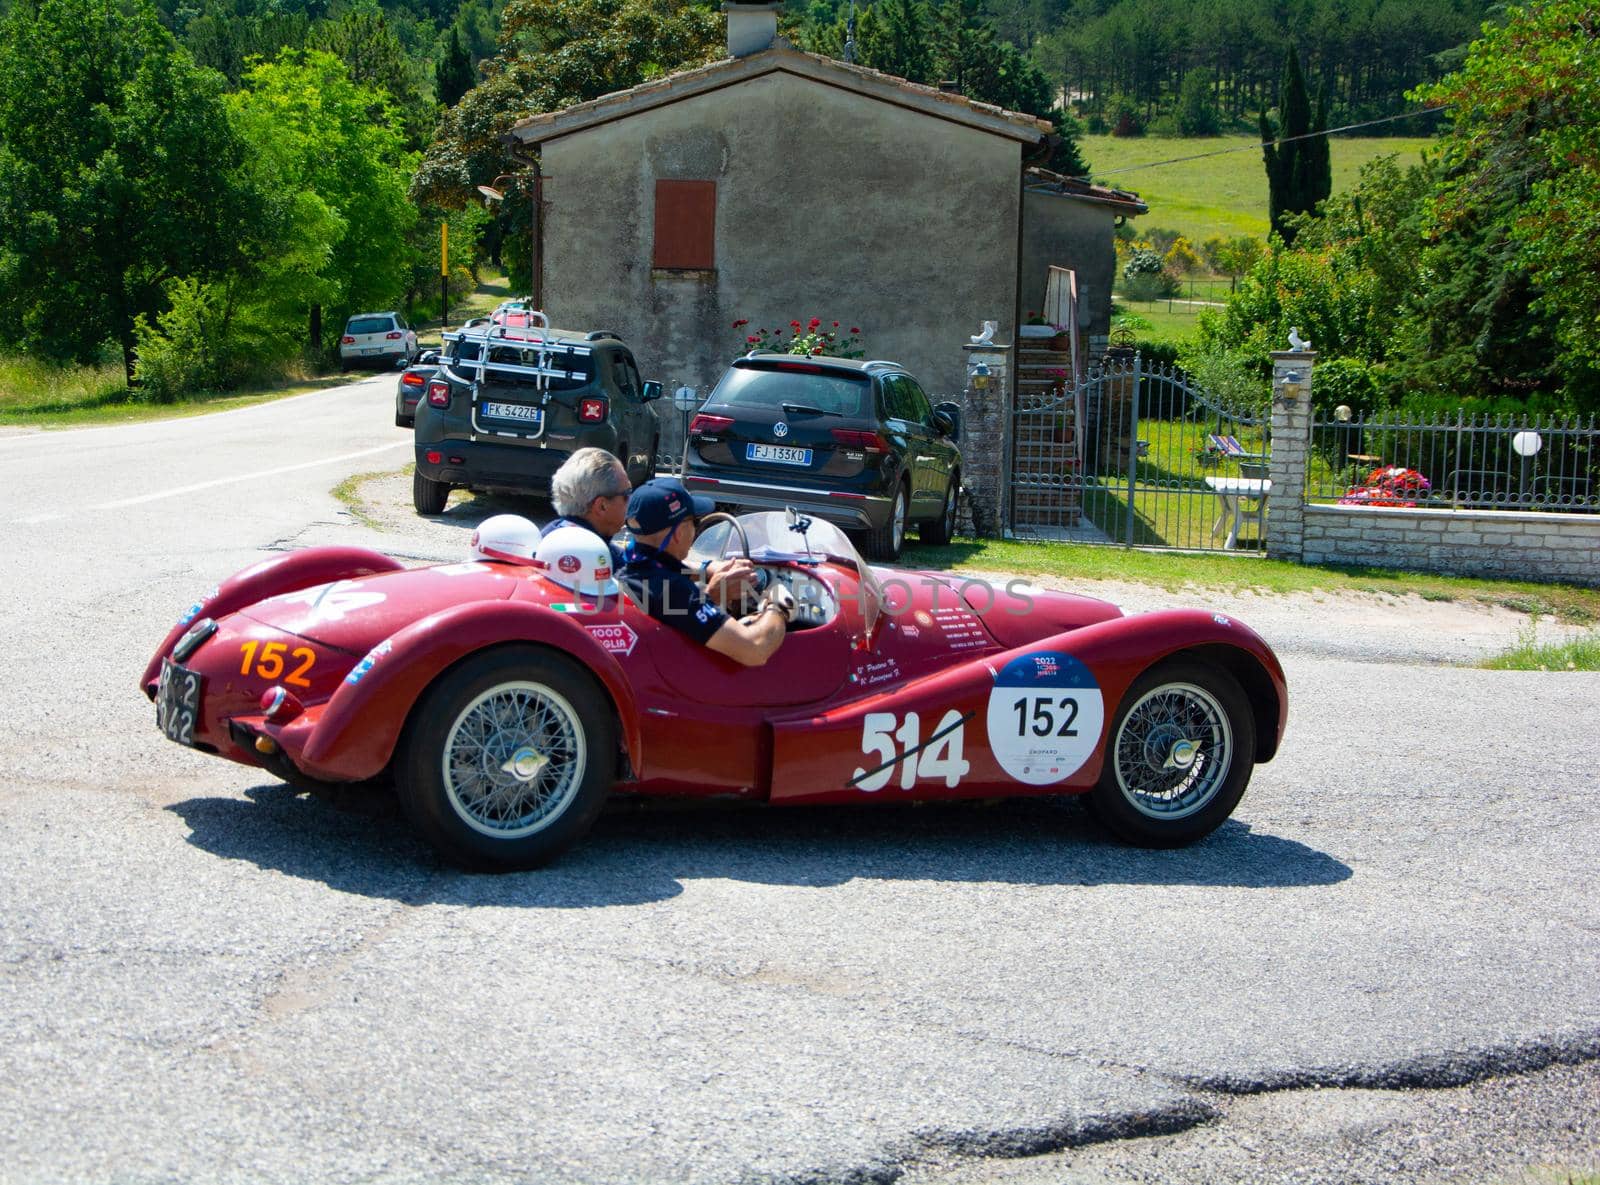 URBINO - ITALY - JUN 16 - 2022 : STANGUELLINI 1100 SPORT 1948 on an old racing car in rally Mille Miglia 2022 the famous italian historical race (1927-1957